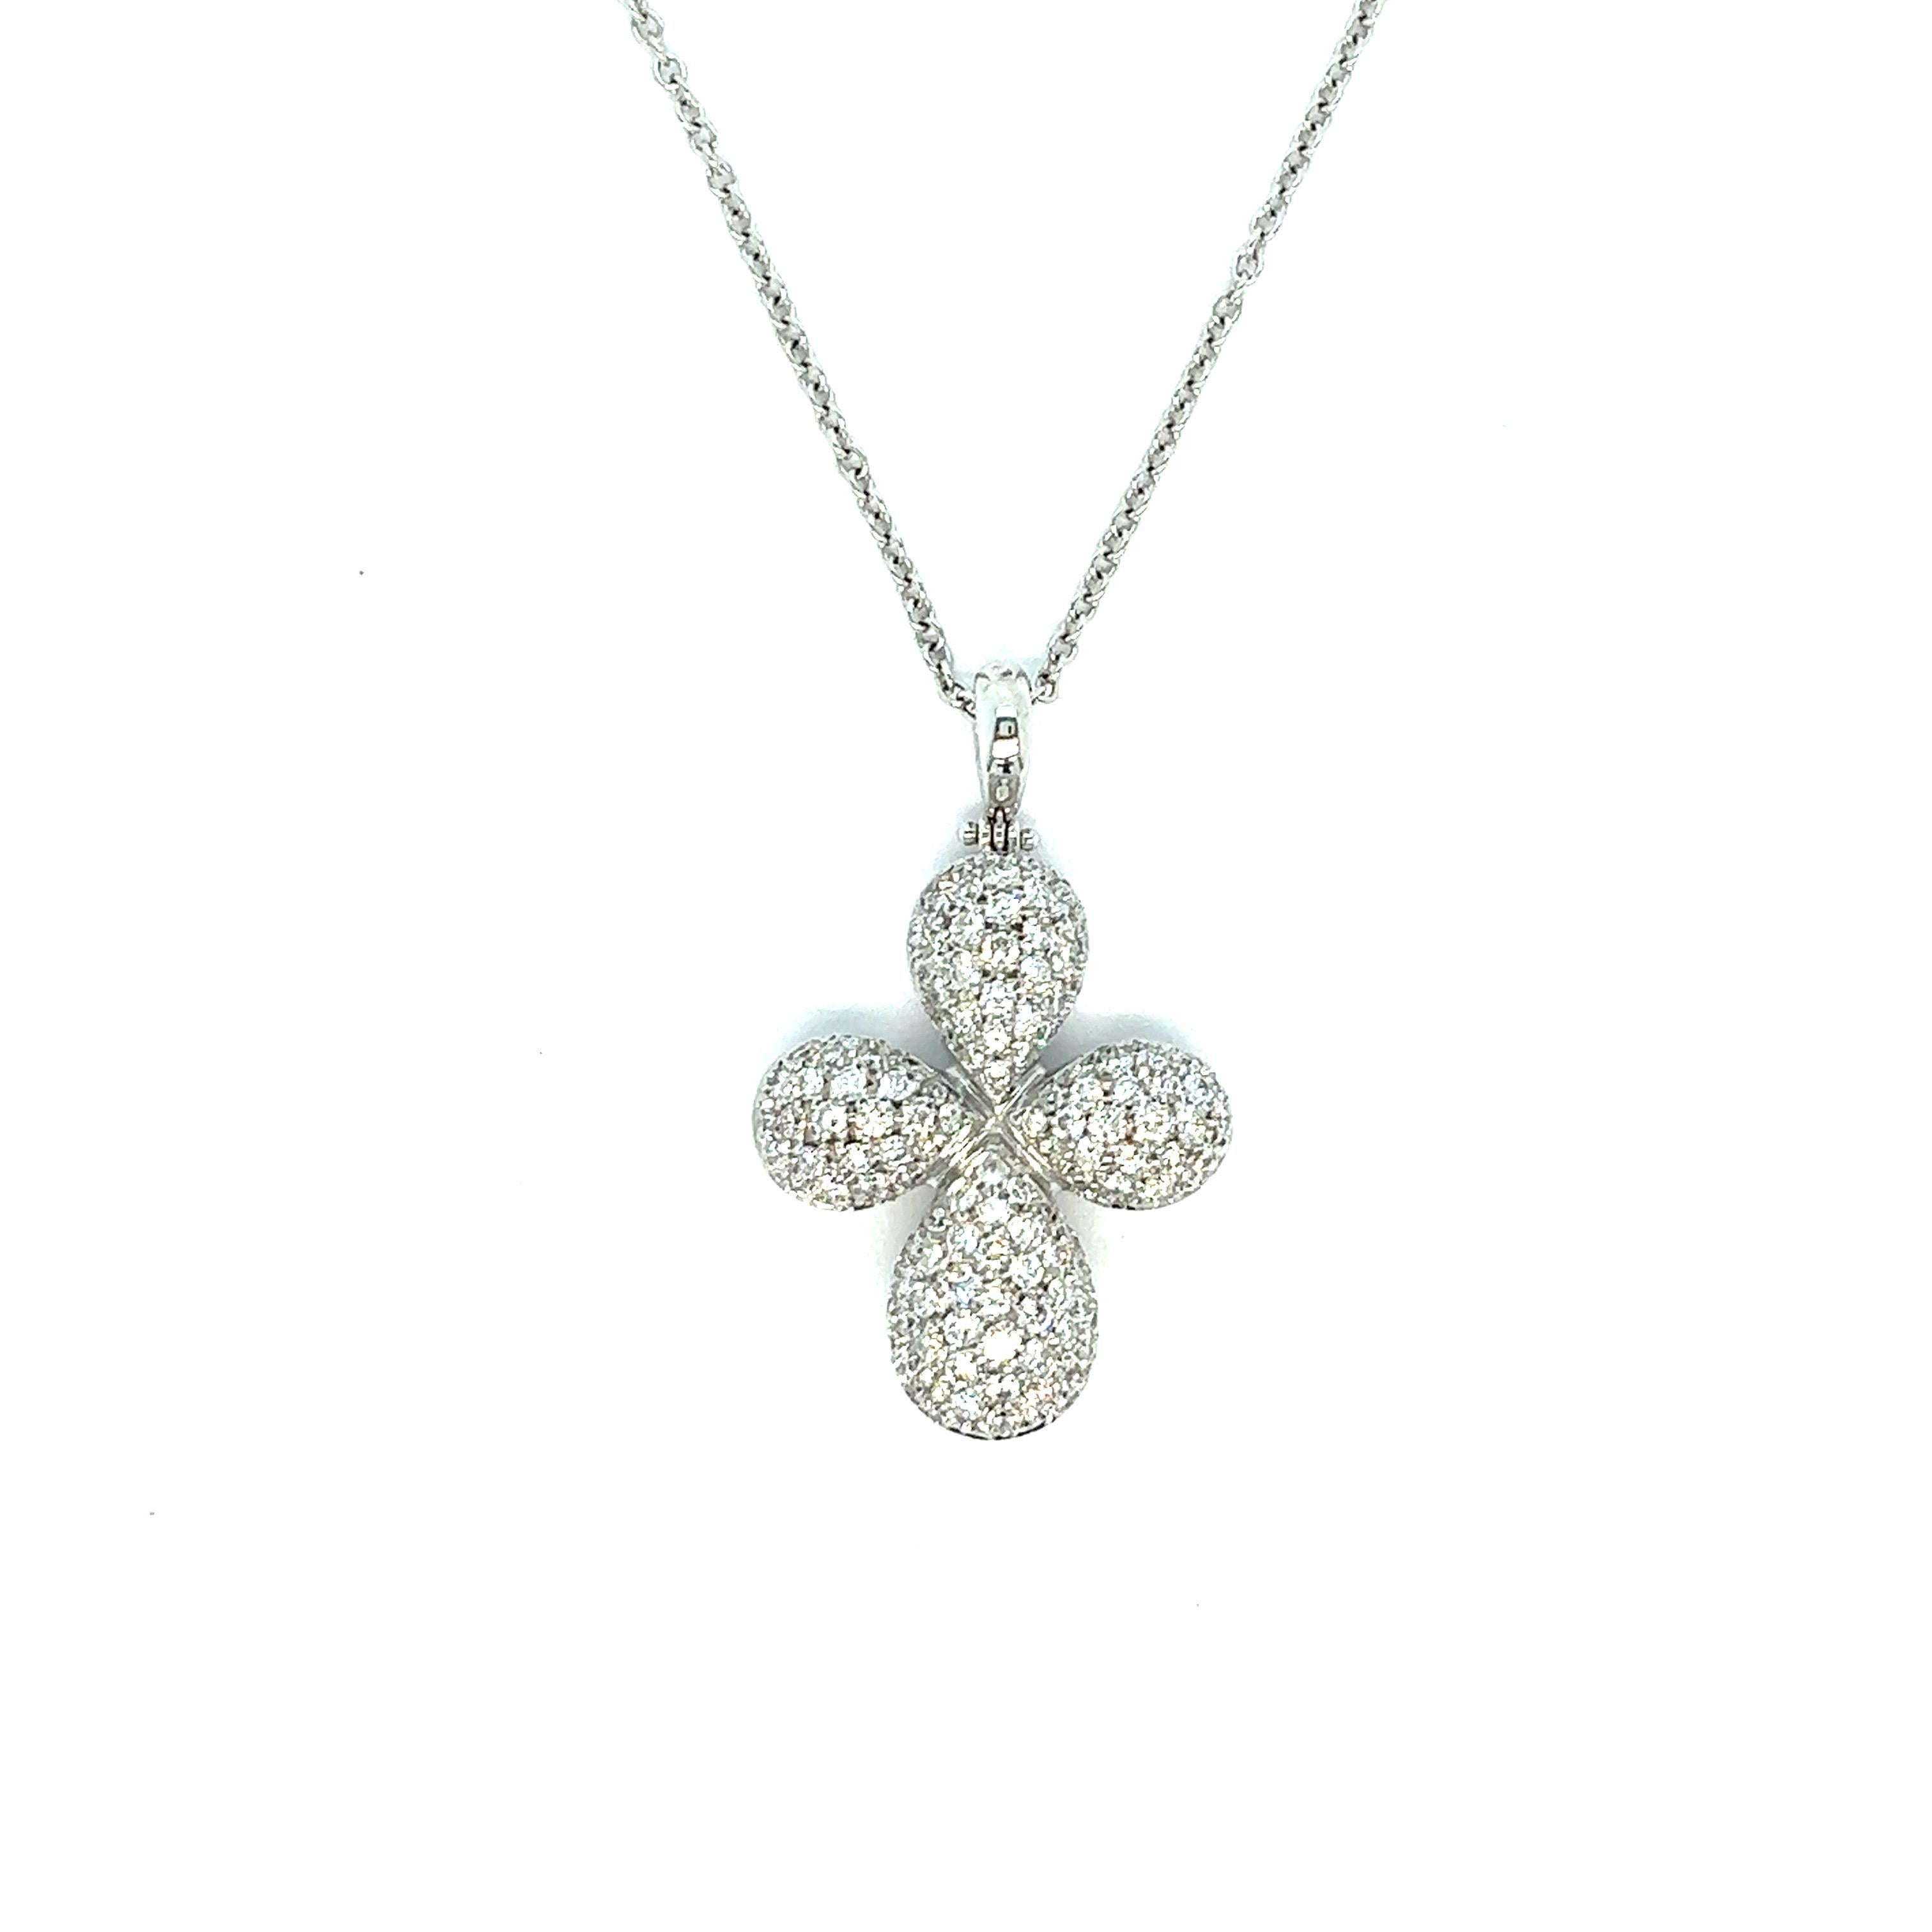 Cross diamond pendant necklace, made in Italy

Round-cut diamonds of 1 carat, 18 karat white gold, cross motif; marked 750

Size: pendant width 0.94 inch, length 1.5 inches; chain length 16.31 inches
Total weight: 14.5 grams